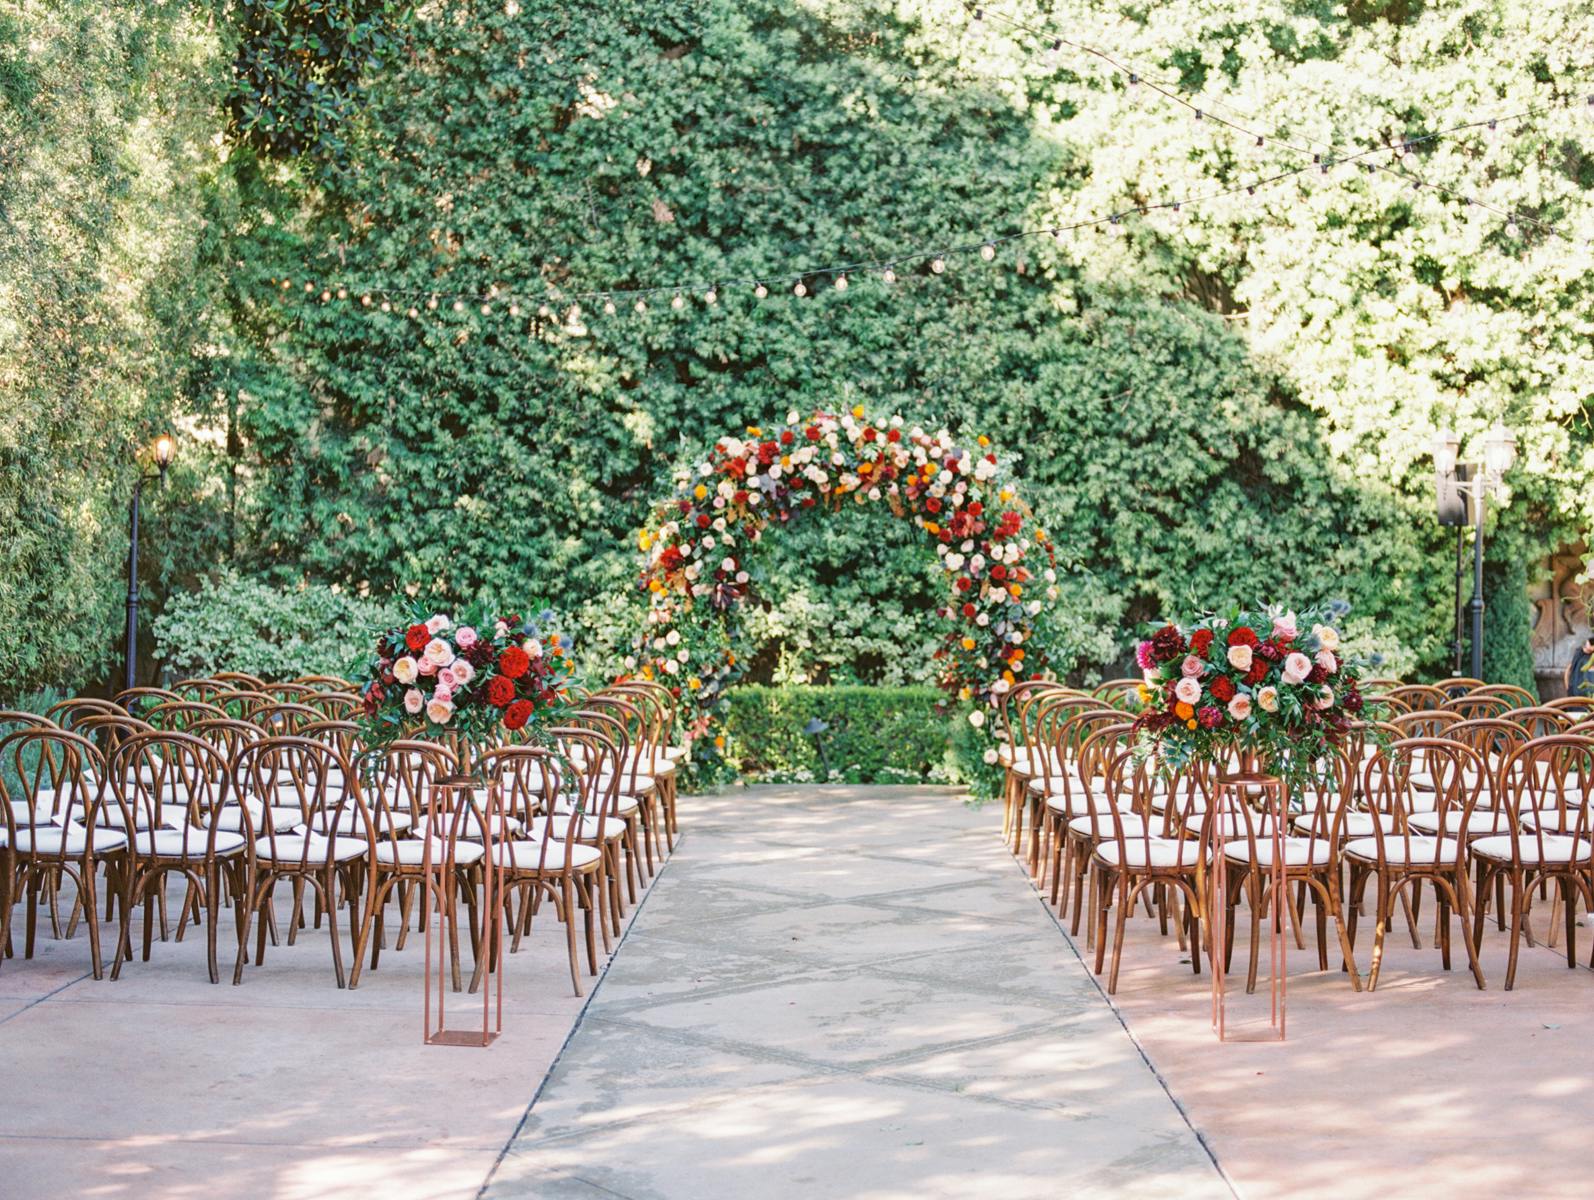 An outdoor wedding ceremony with fall wedding decorations that include a red and green floral arch | PartySlate